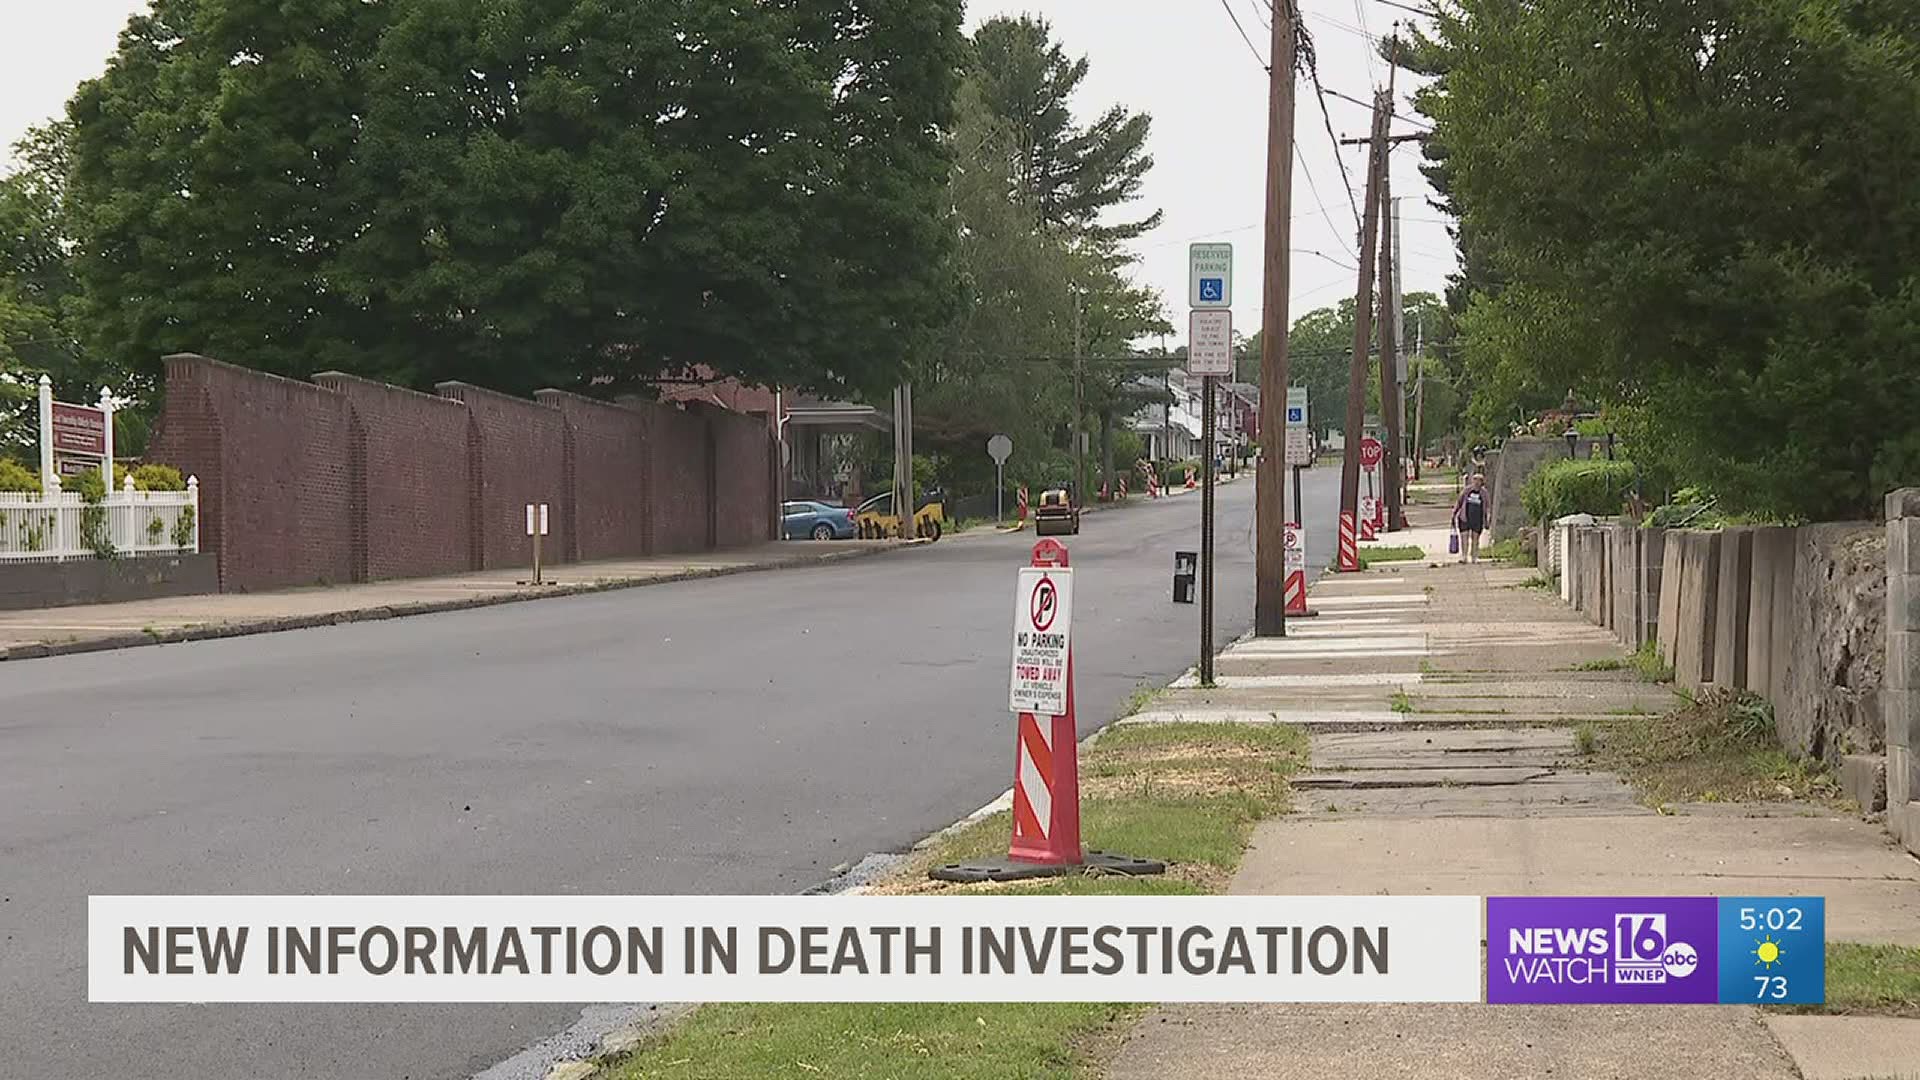 A search warrant has revealed new information in the death investigation of Cheyenne Swartz who passed away days after being found badly injured near Shamokin.